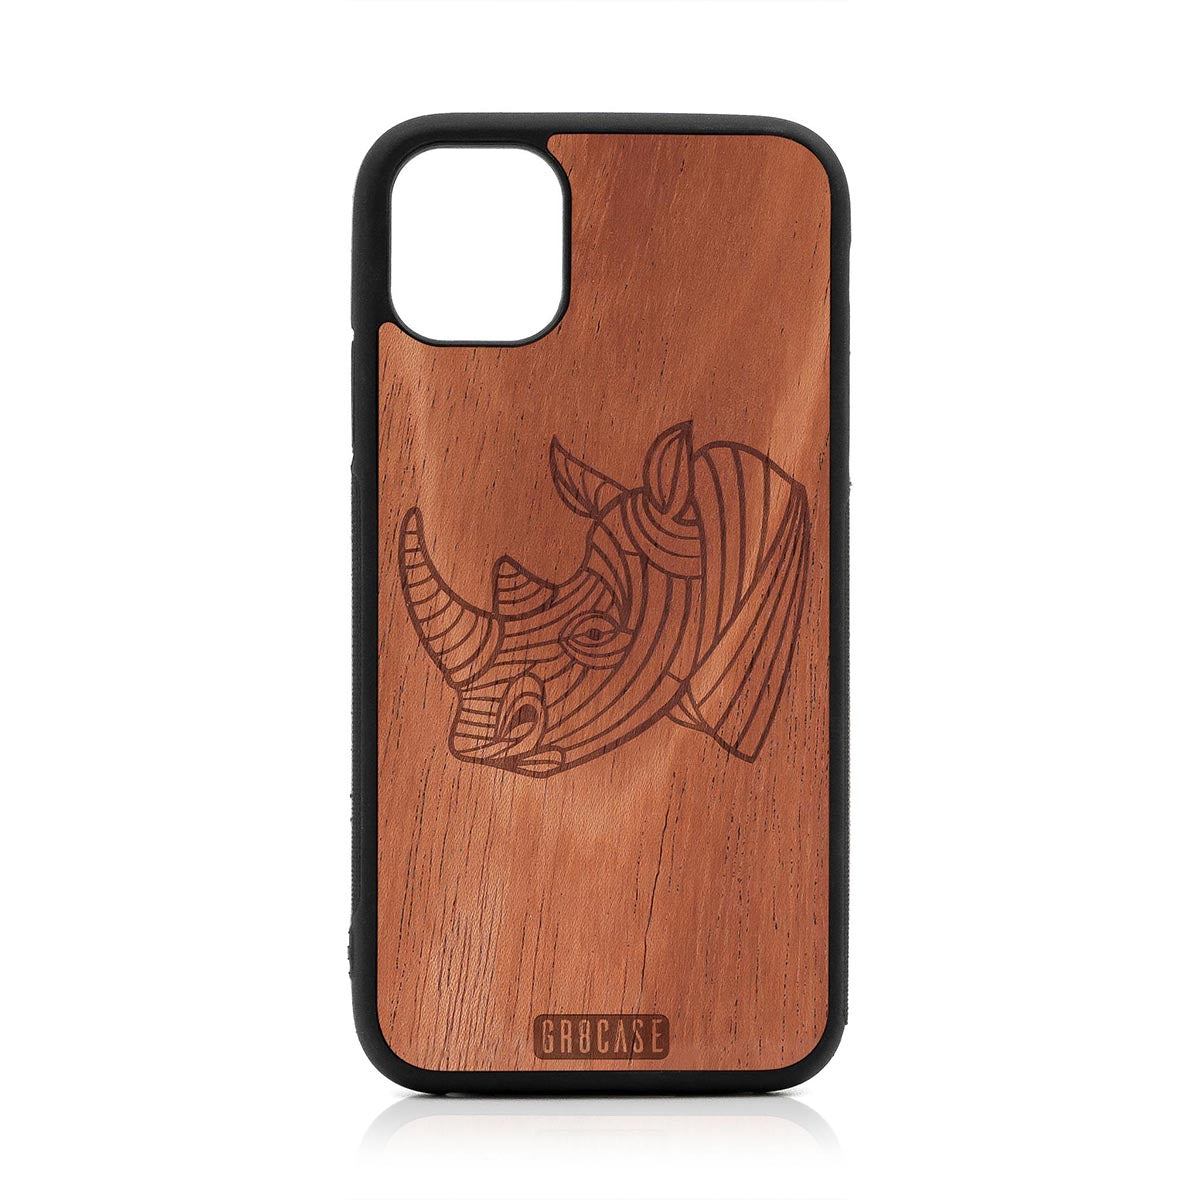 Rhino Design Wood Case For iPhone 11 by GR8CASE